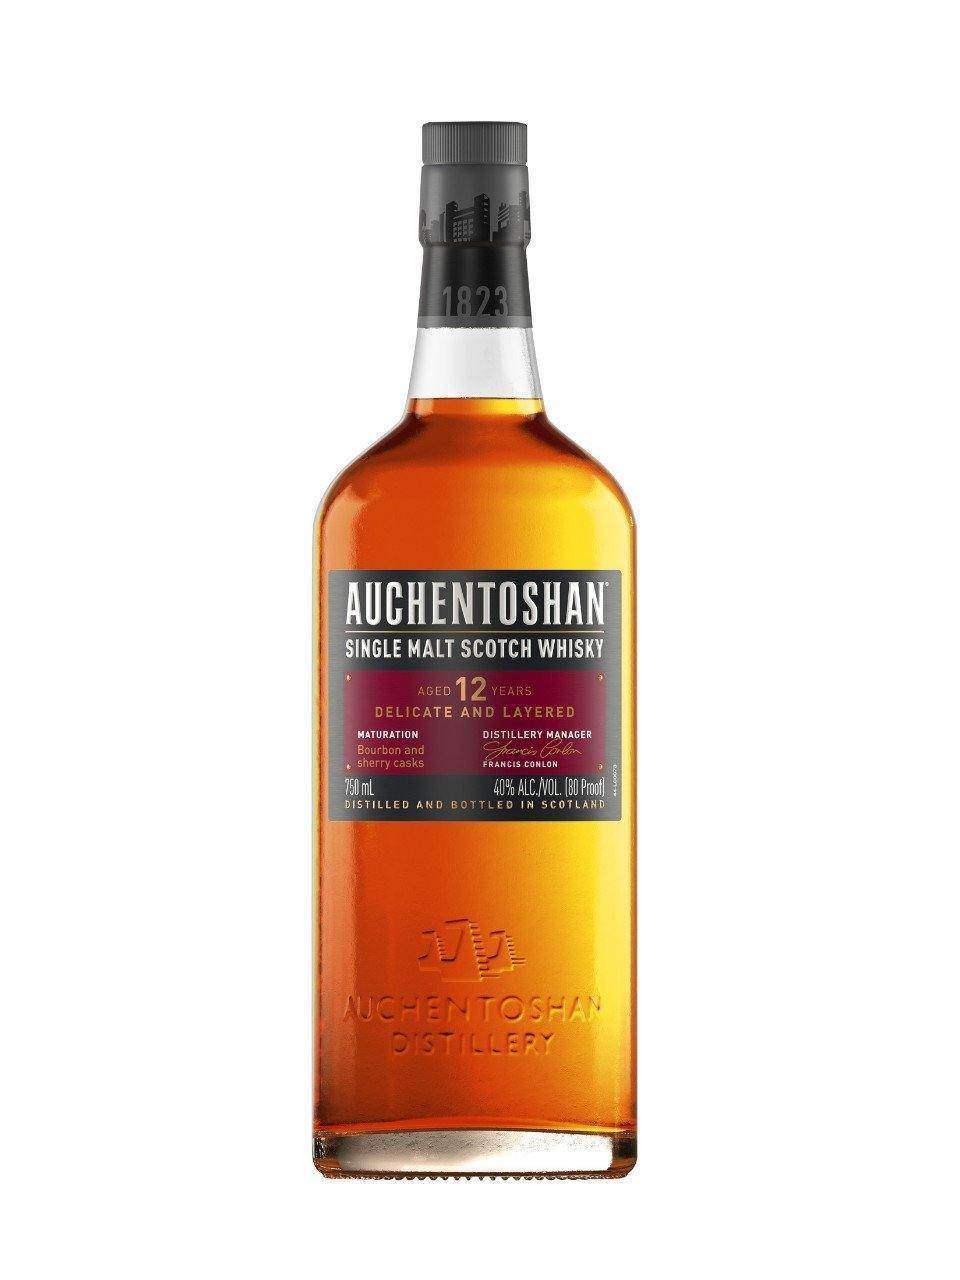 Auchentoshan 12 Year Old Single Malt Scotch Whisky | Exquisite Wine & Alcohol Gift Delivery Toronto Canada | Vyno